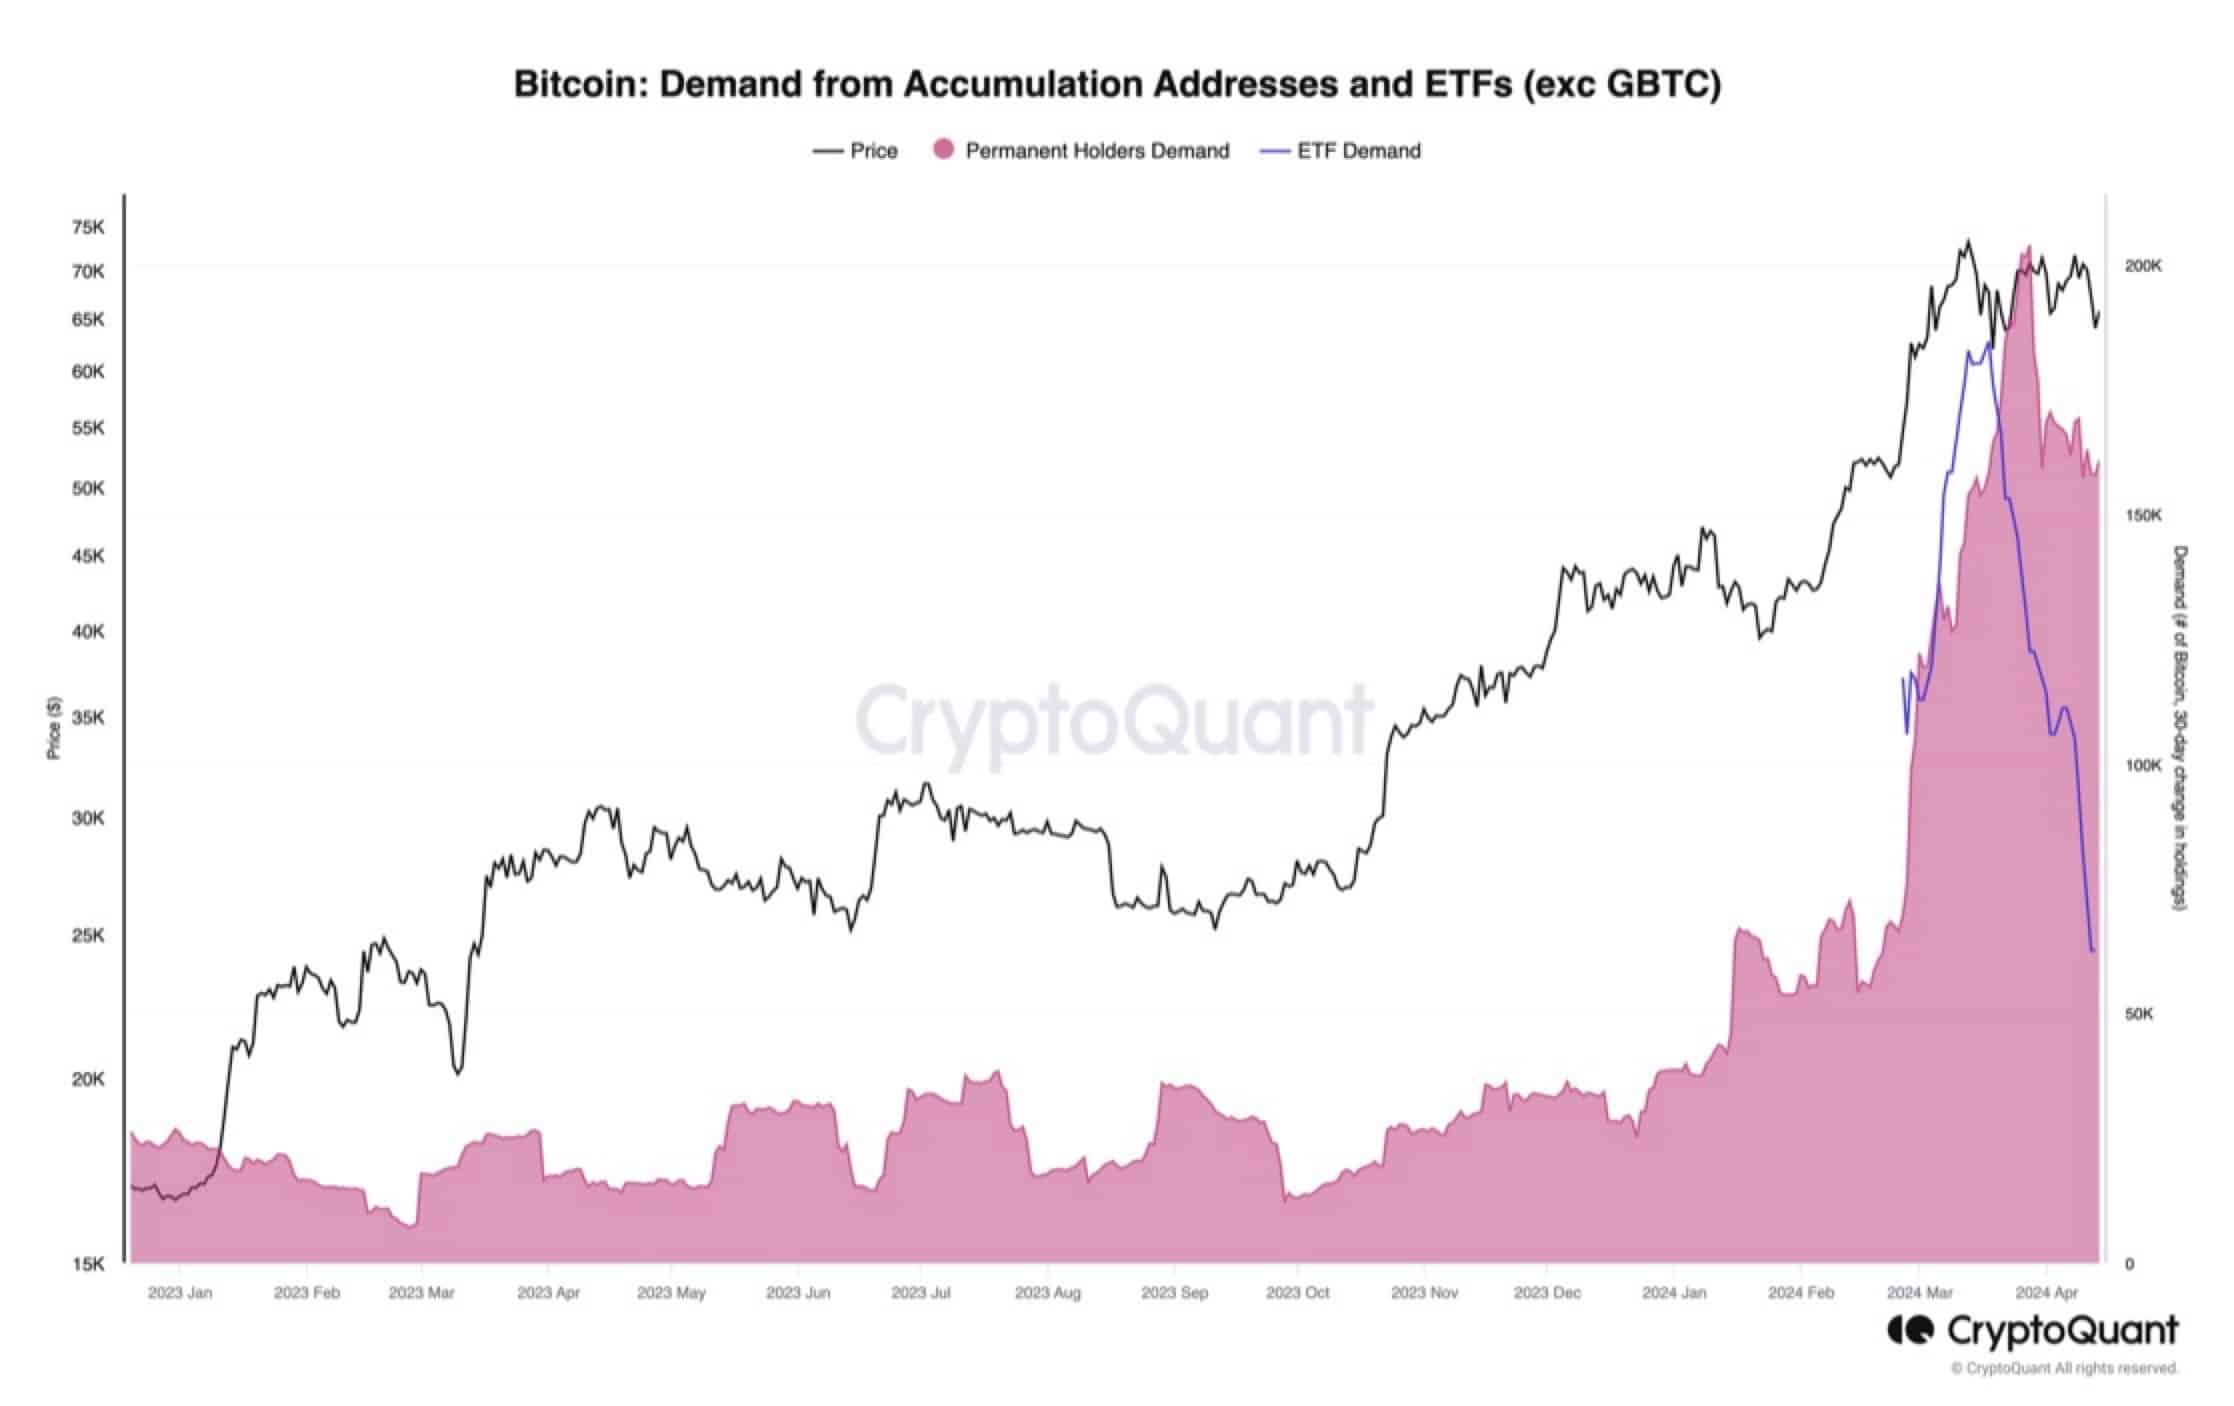 Accumulation of demand for Bitcoin